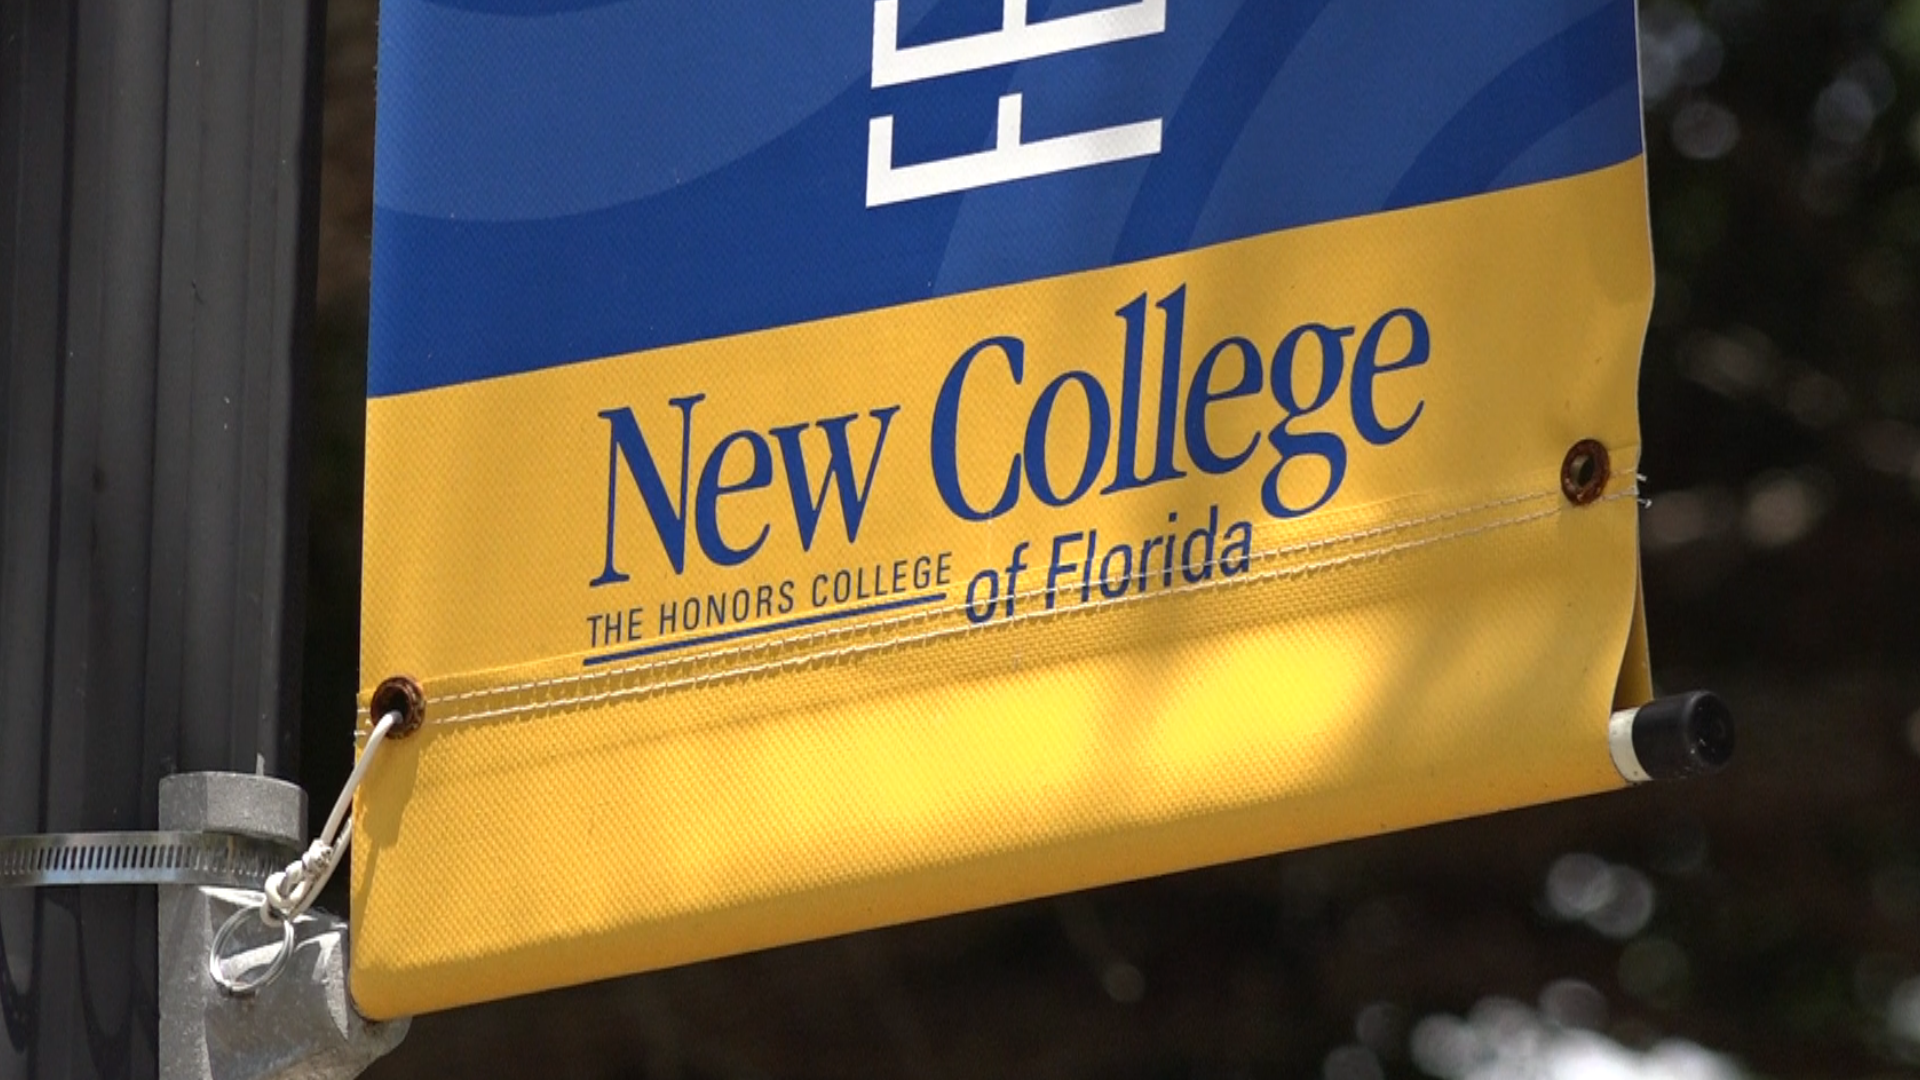 Move in day for students at New College of Florida is this Friday, and the Florida Board of Governors has already approved their reopening plan.